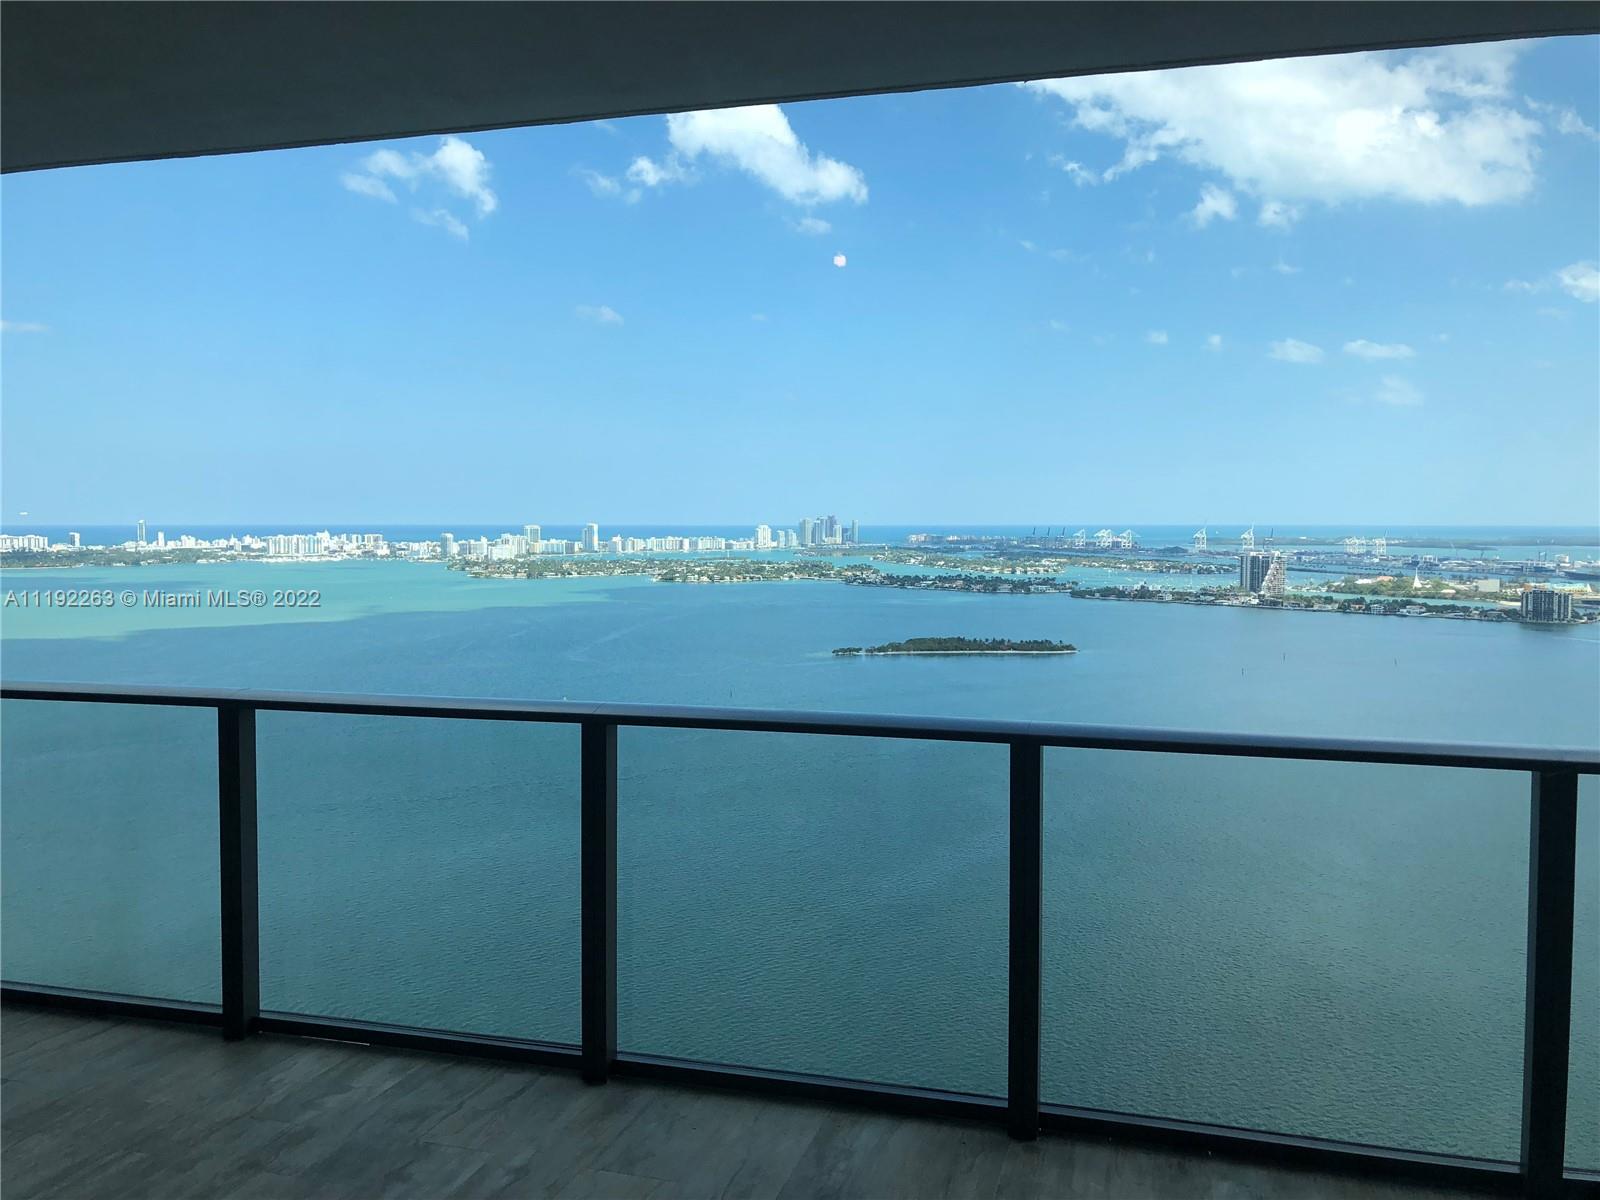 Direct and unobstructed water views! 4 beds 4 1/2 Baths, 9' foot ceilings. Fully finished with wood look porcelain floors throughout the unit. Window treatments, build up closets, top of the line finishes. Luxurious amenities. Tenant occupied until June 15th. Need 24hrs to show.